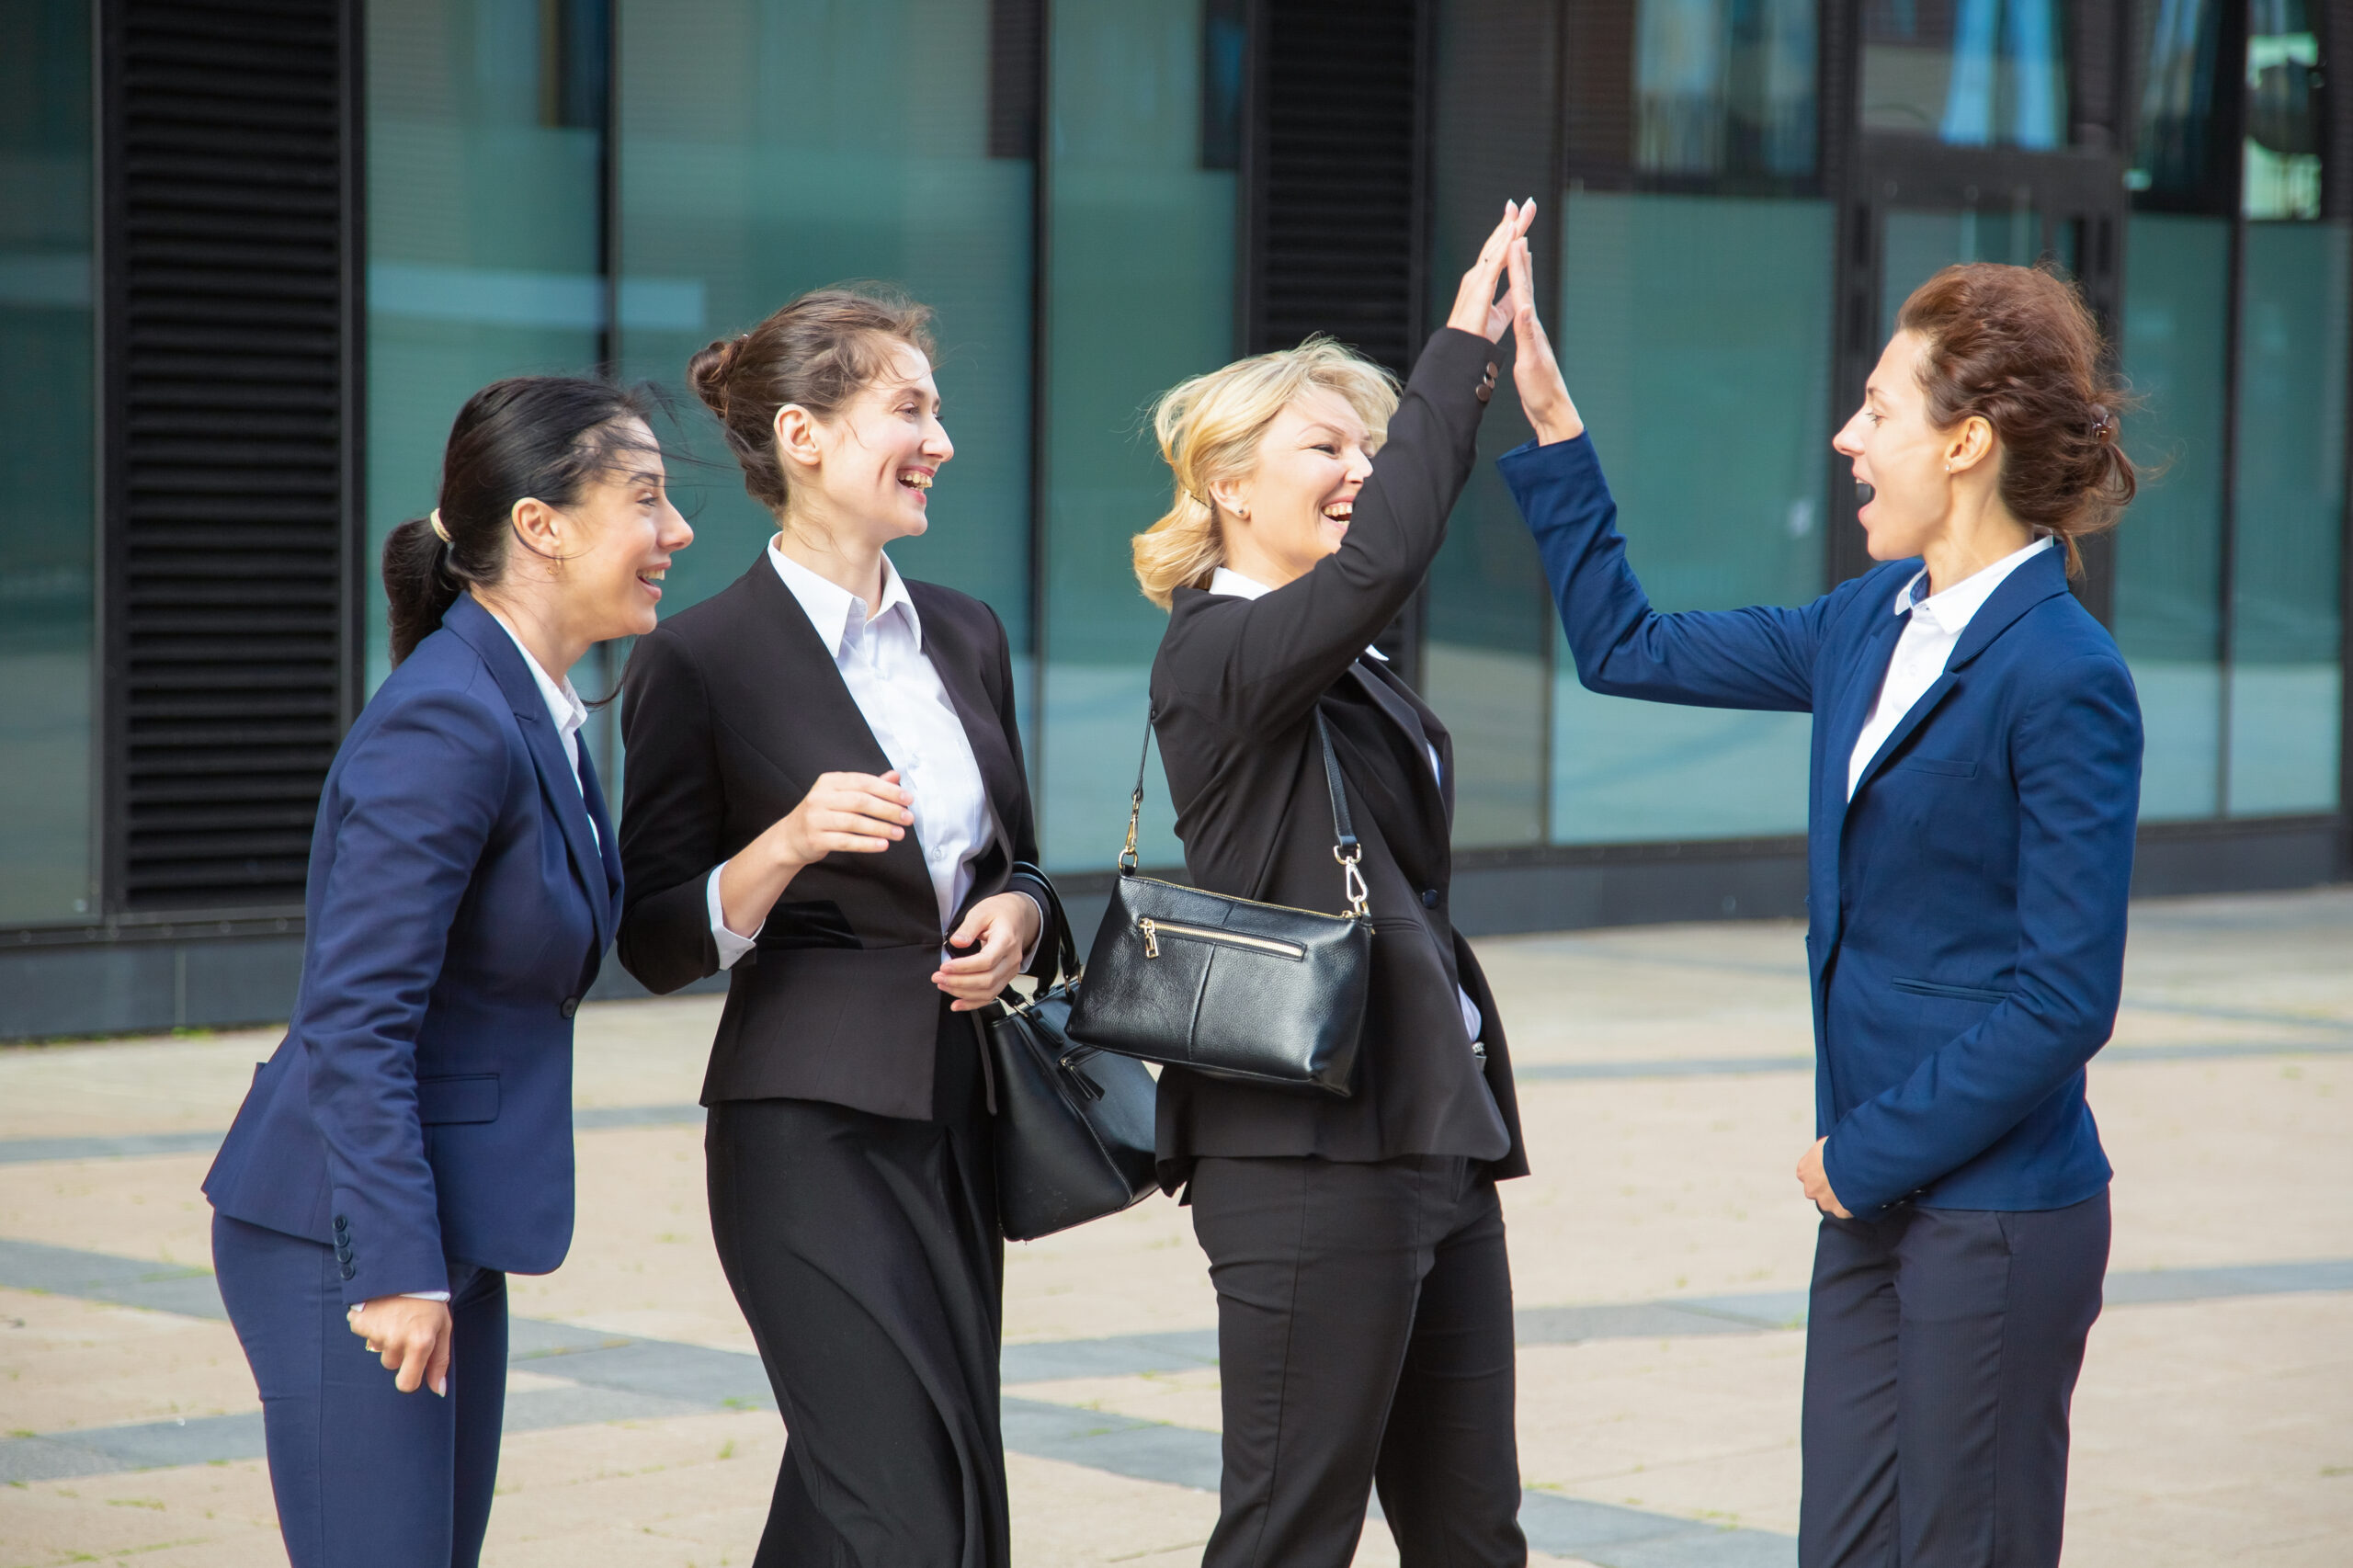 Happy excited business ladies giving high five. Businesswomen wearing suits meeting in city, celebrating success. Team success and teamwork concept